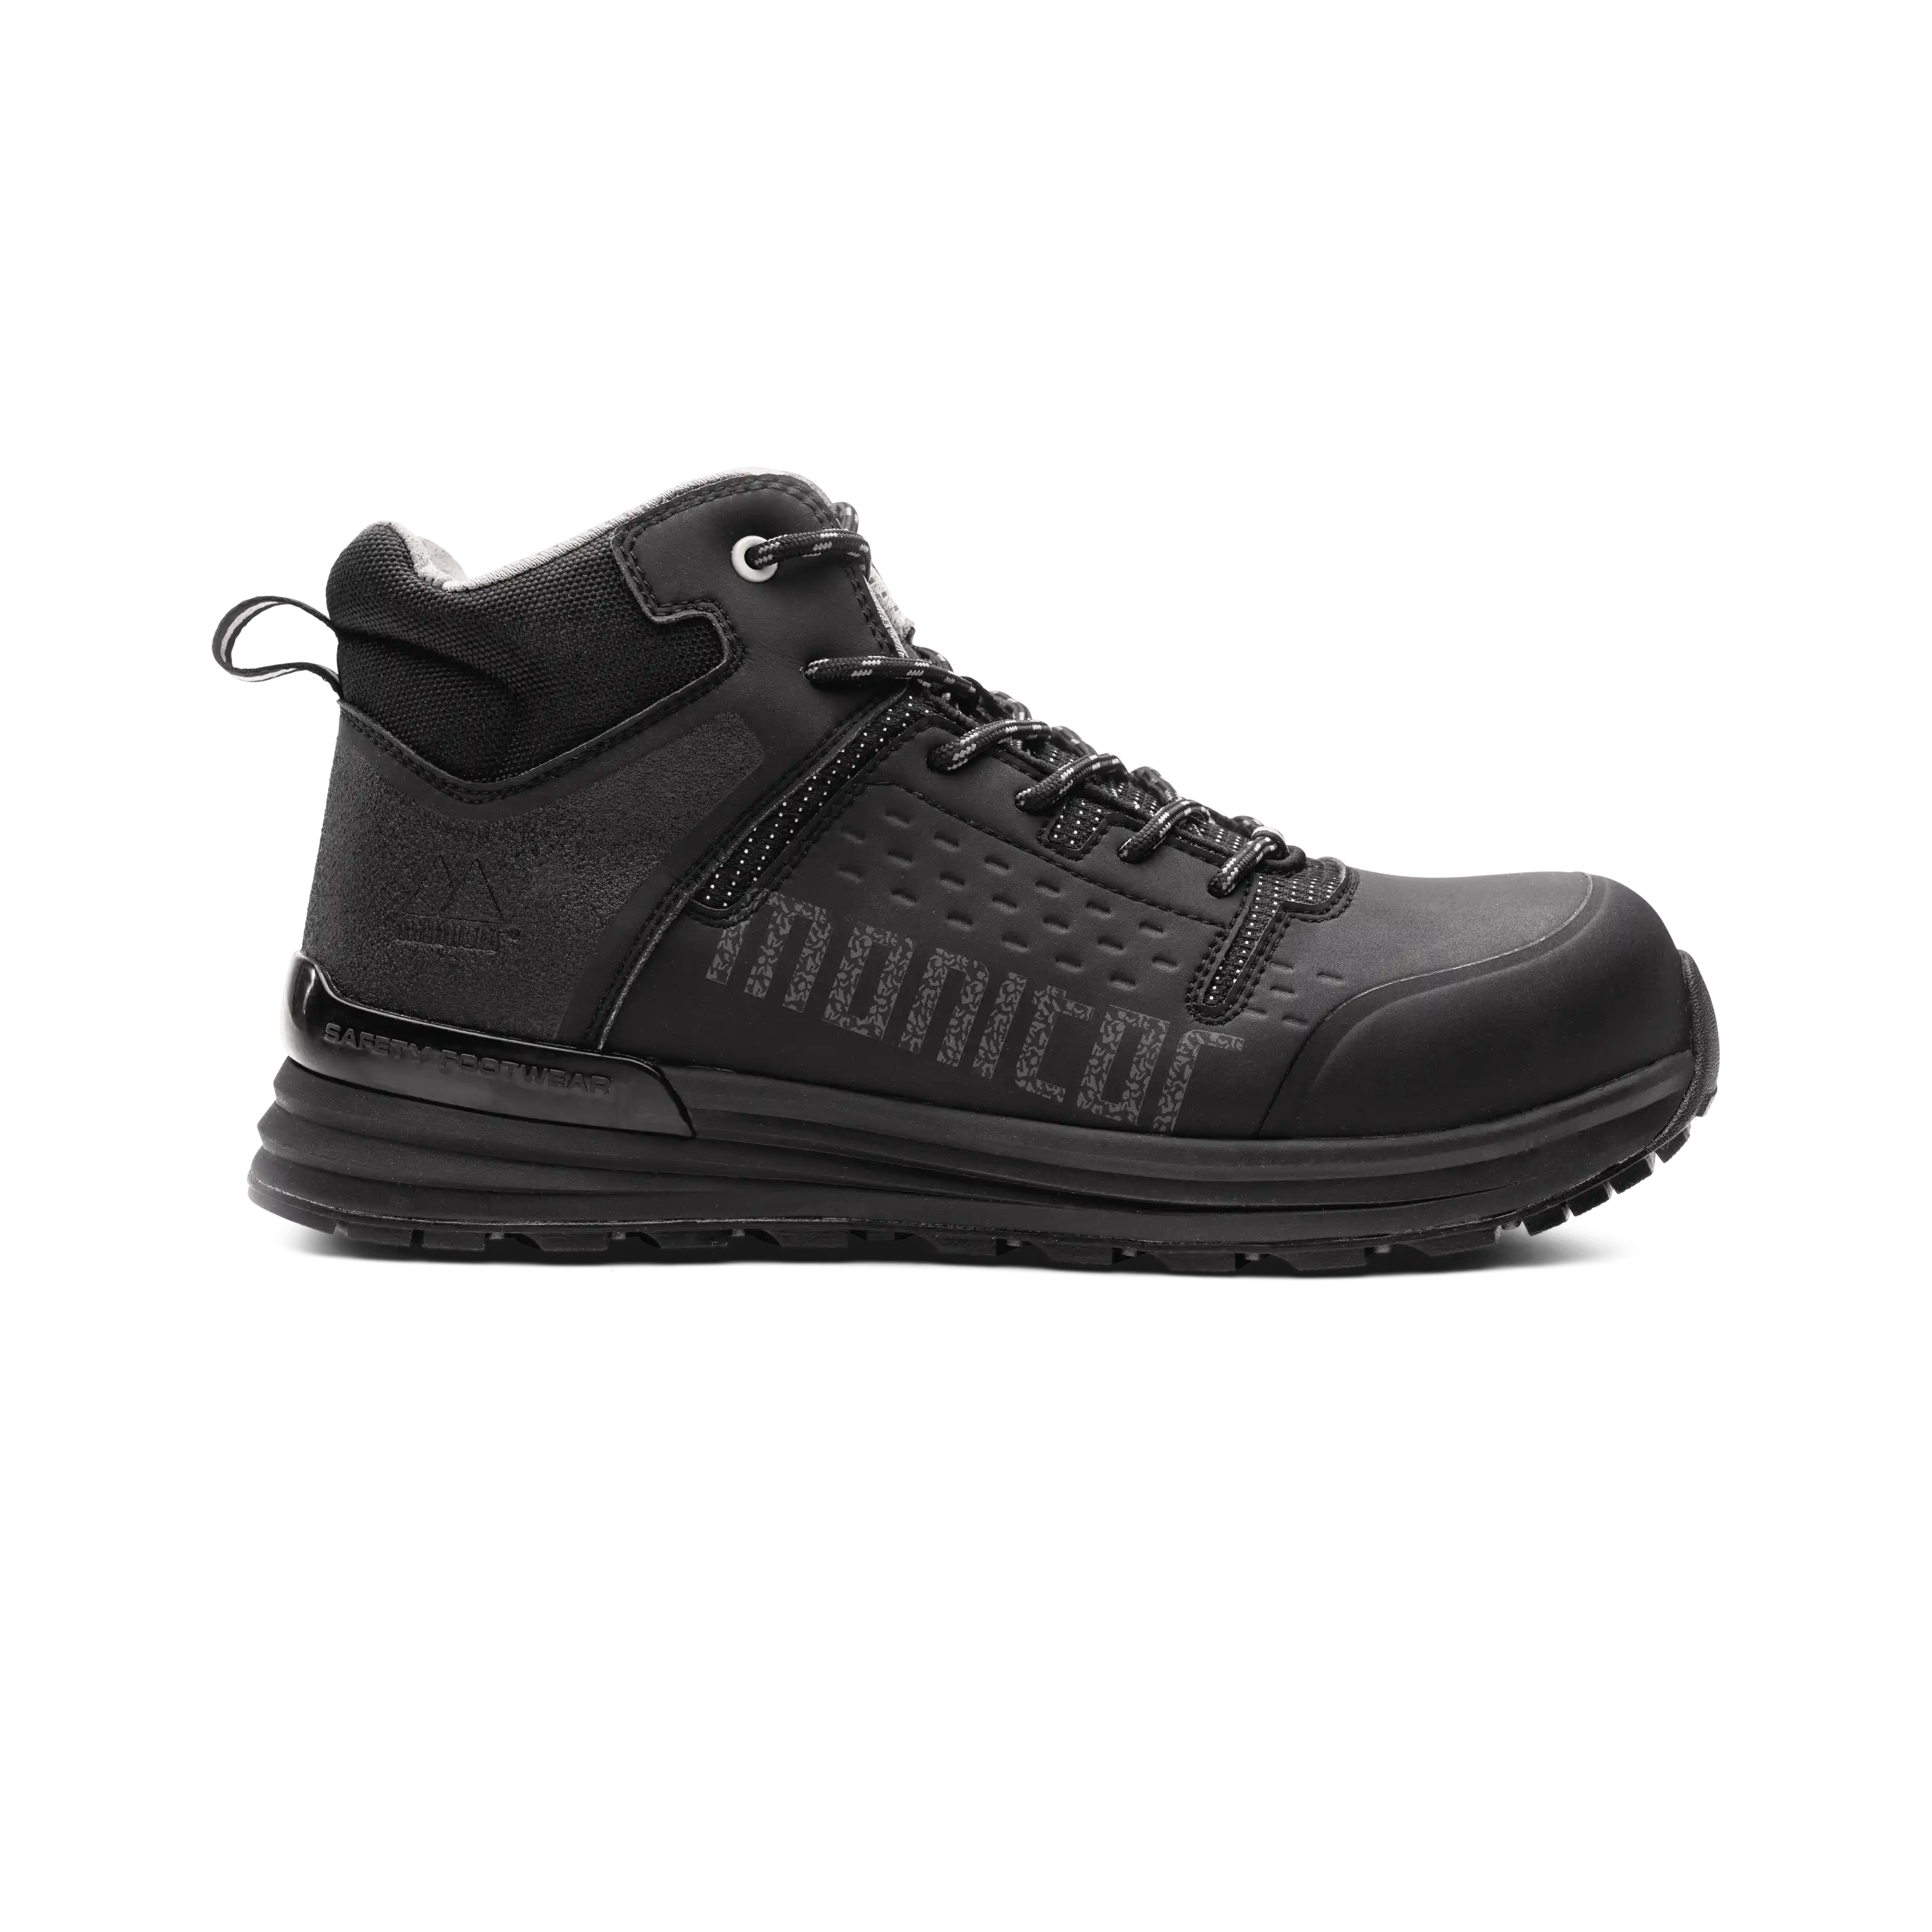 S.W.A.T. Safety Boot Black